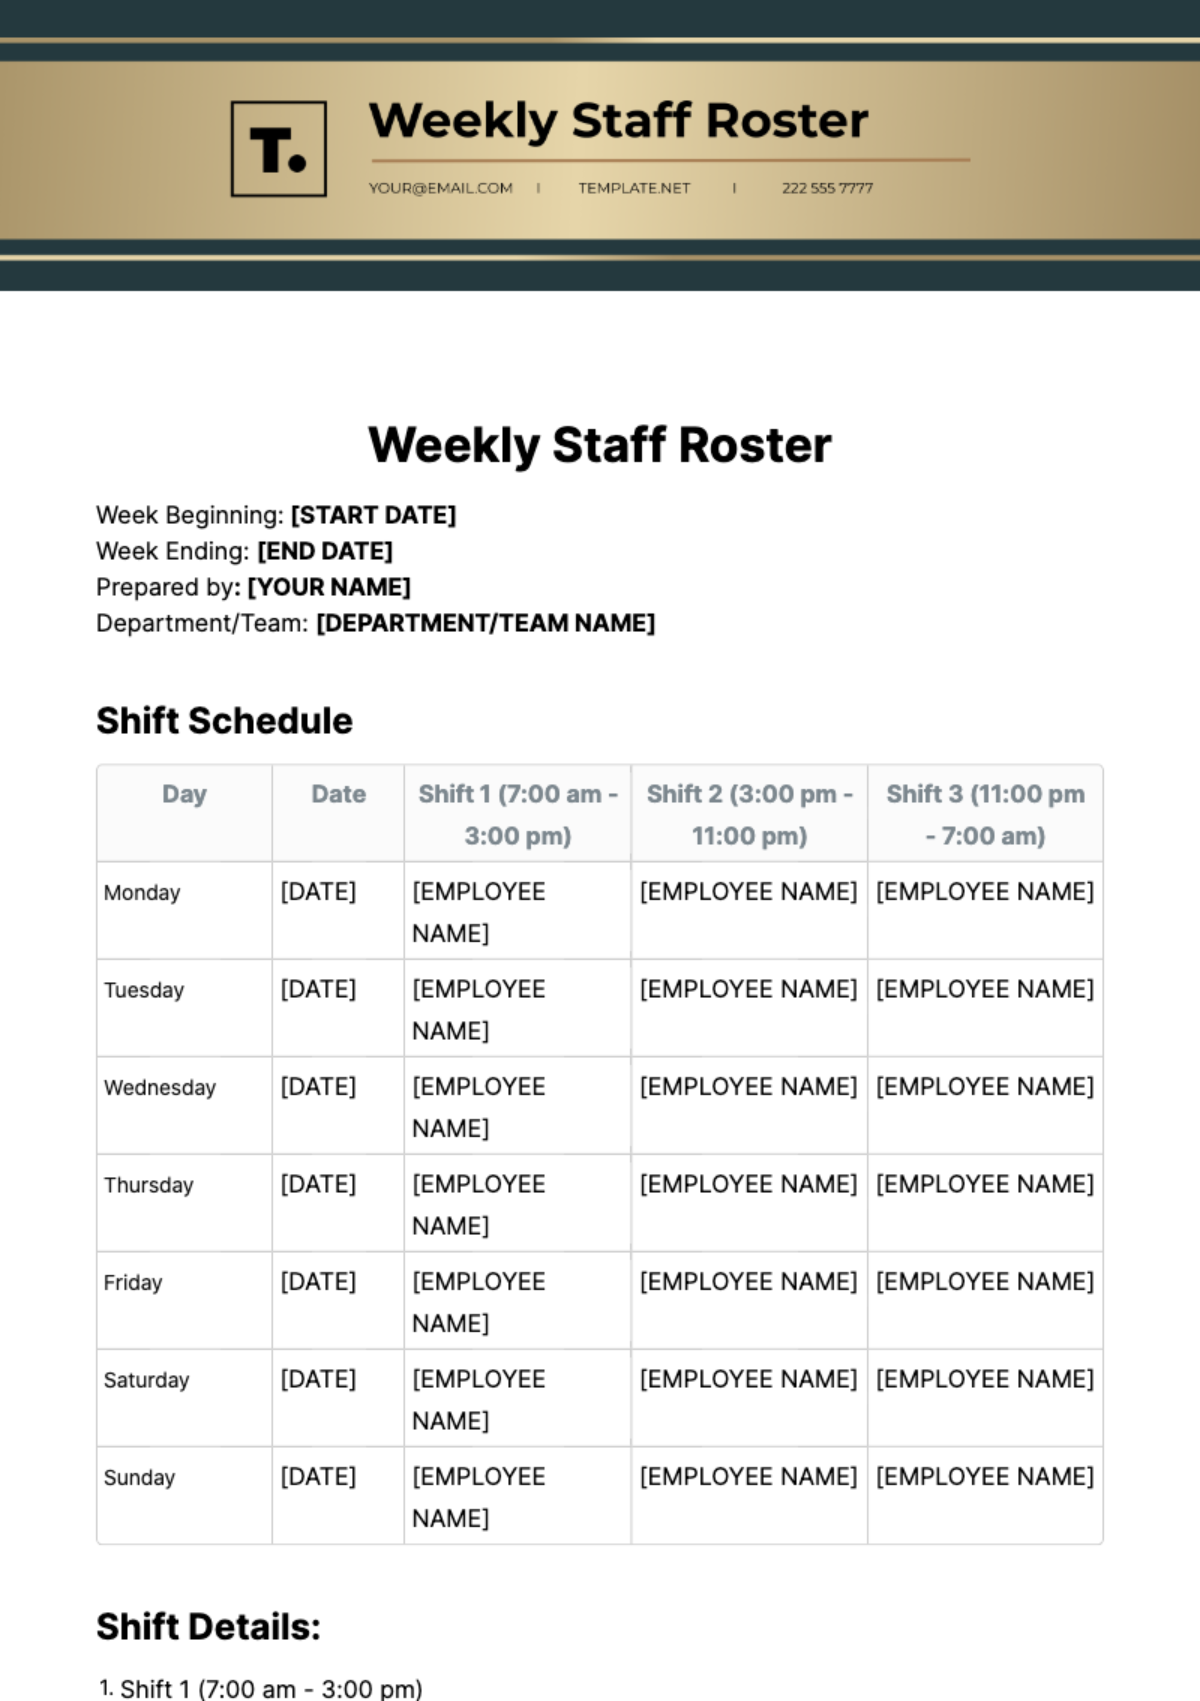 Weekly Staff Roster Template